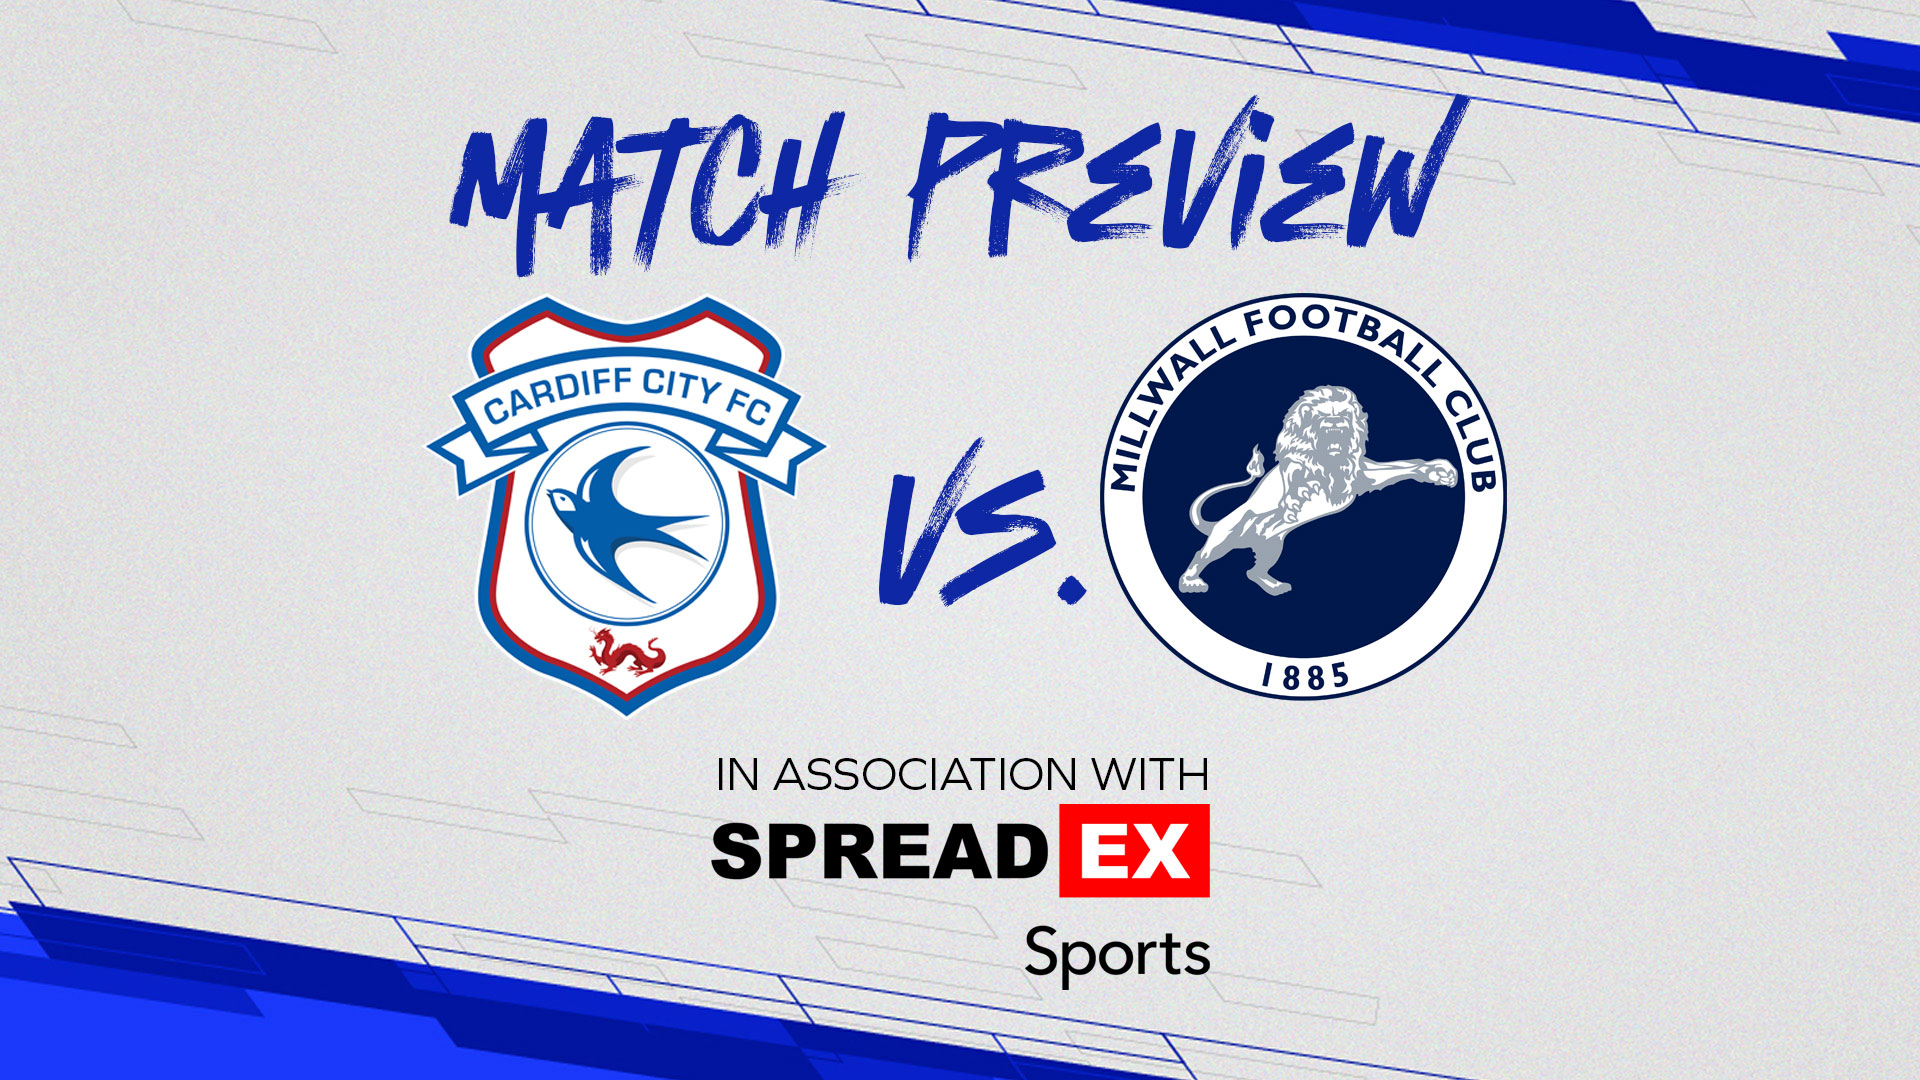 Match Preview: Cardiff City vs. Millwall